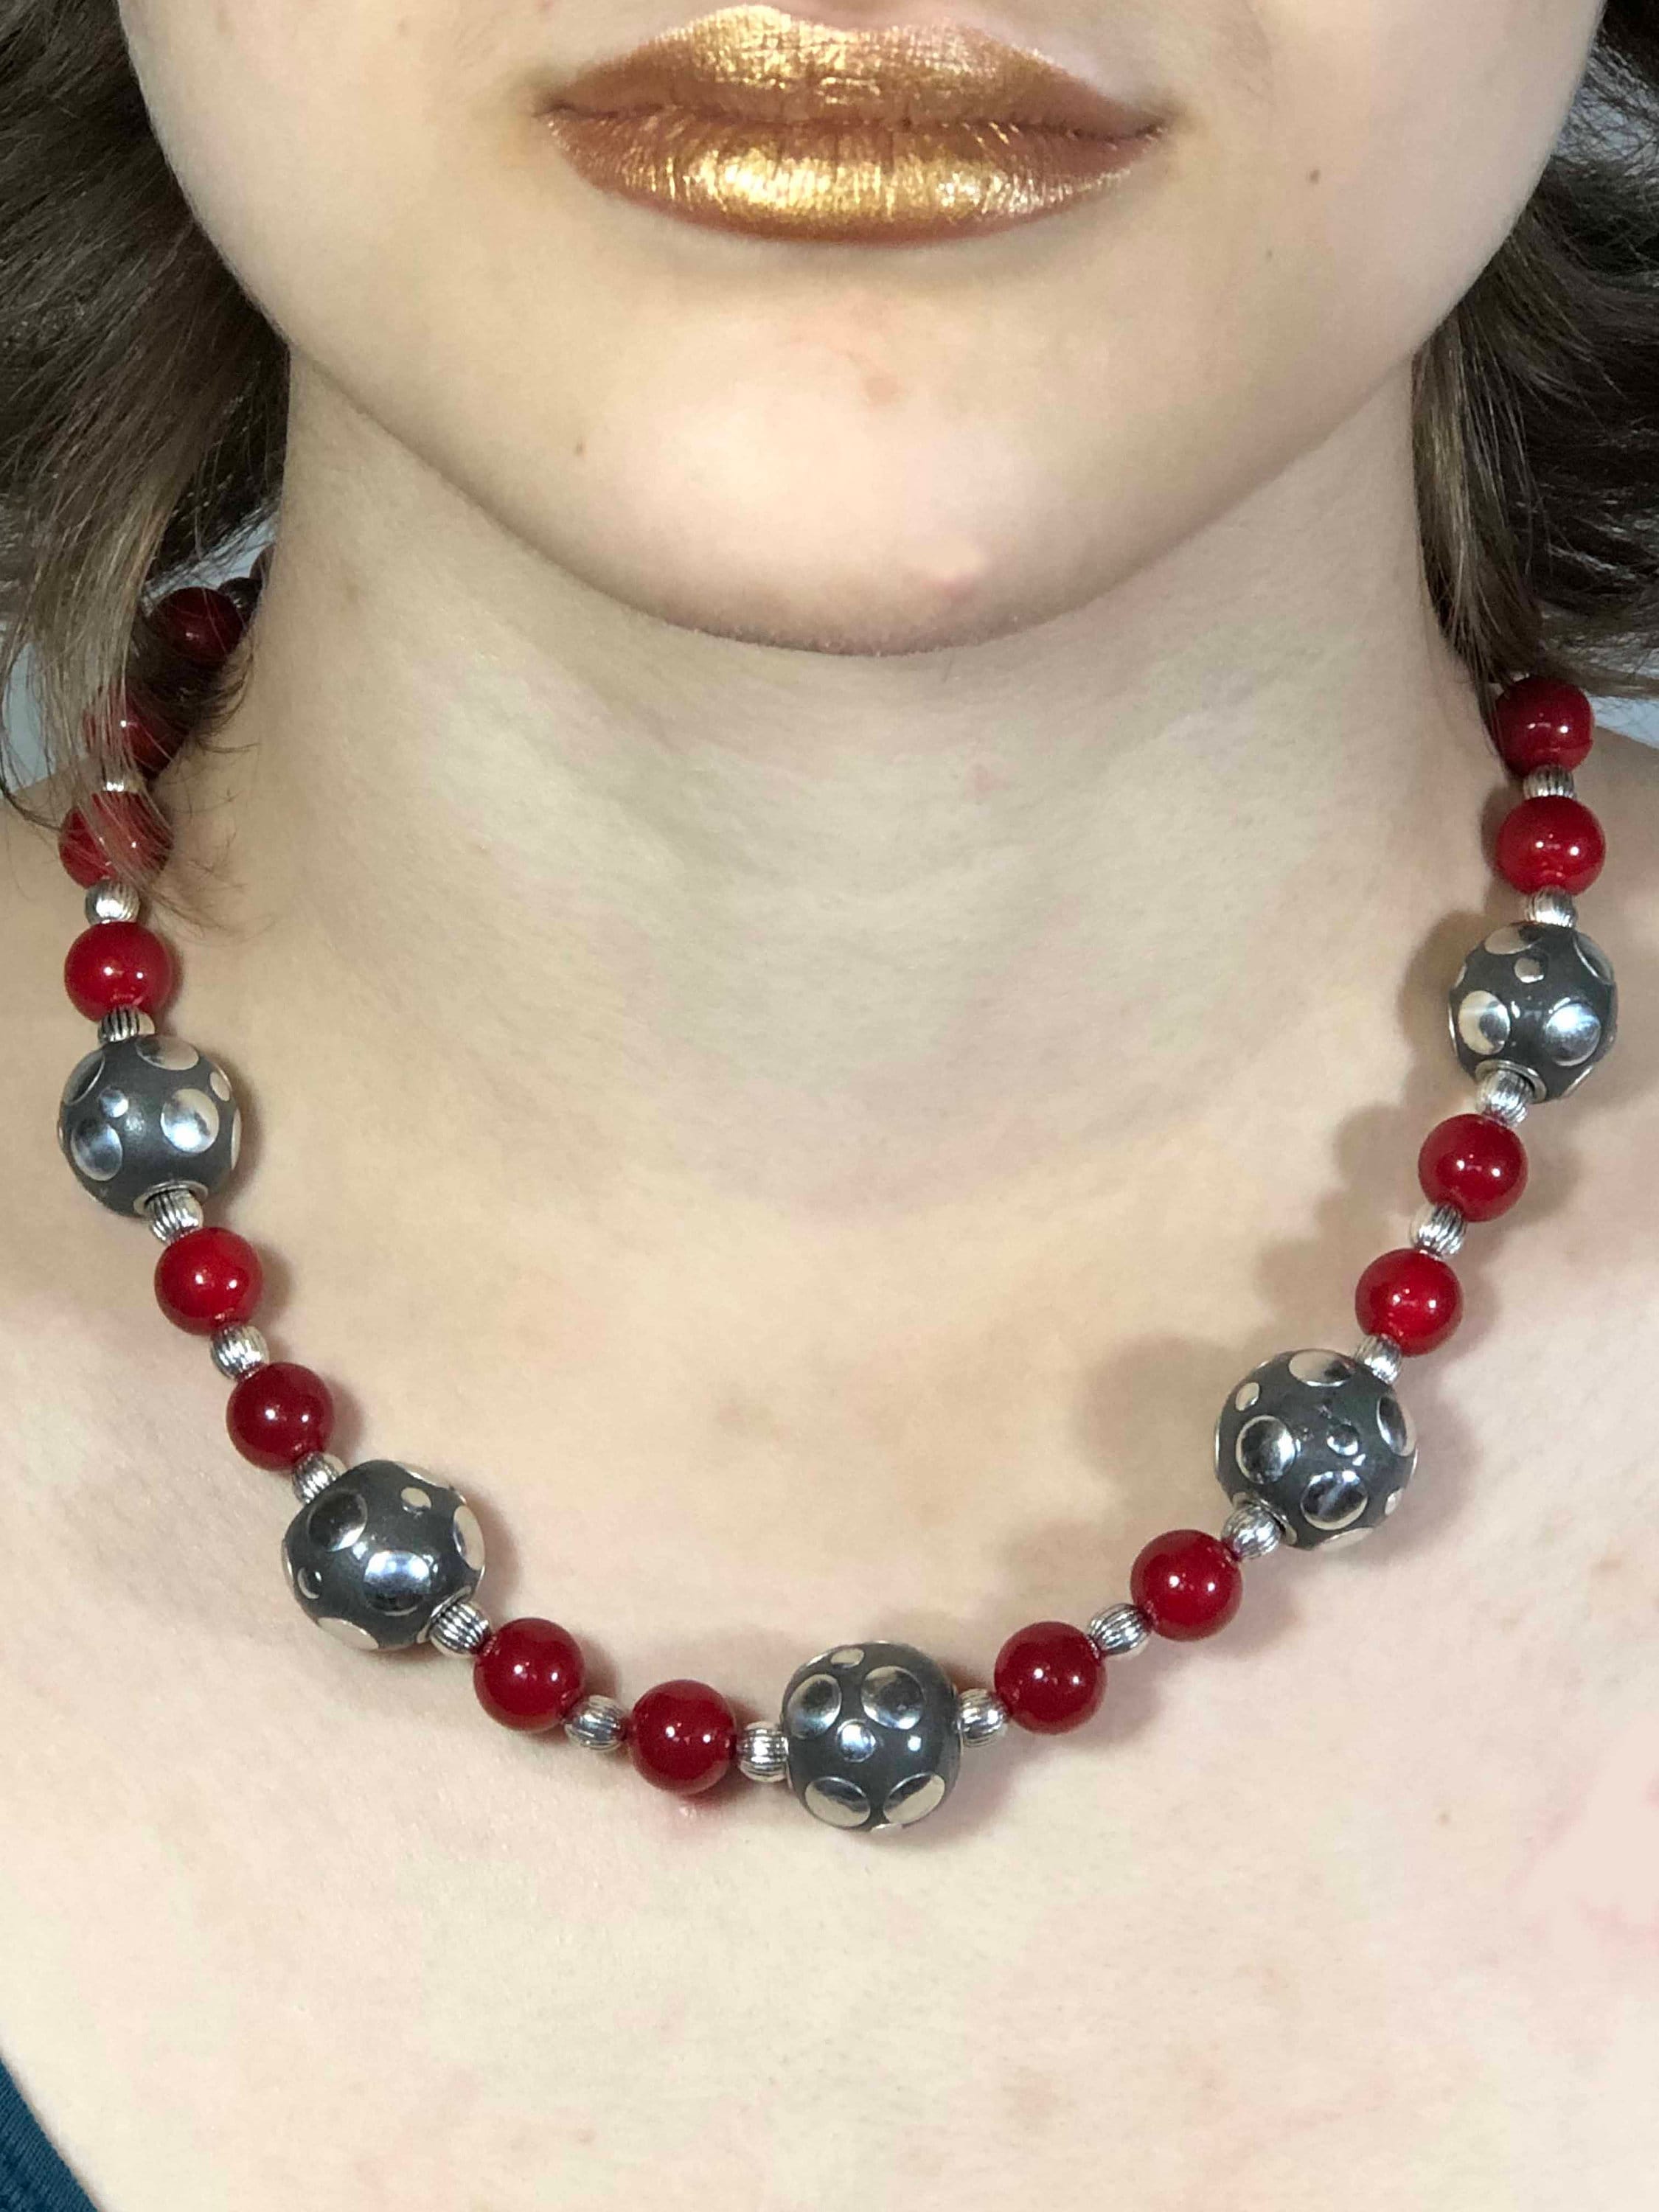 Shiny Pewter beads. Beaded necklace Red glass beads